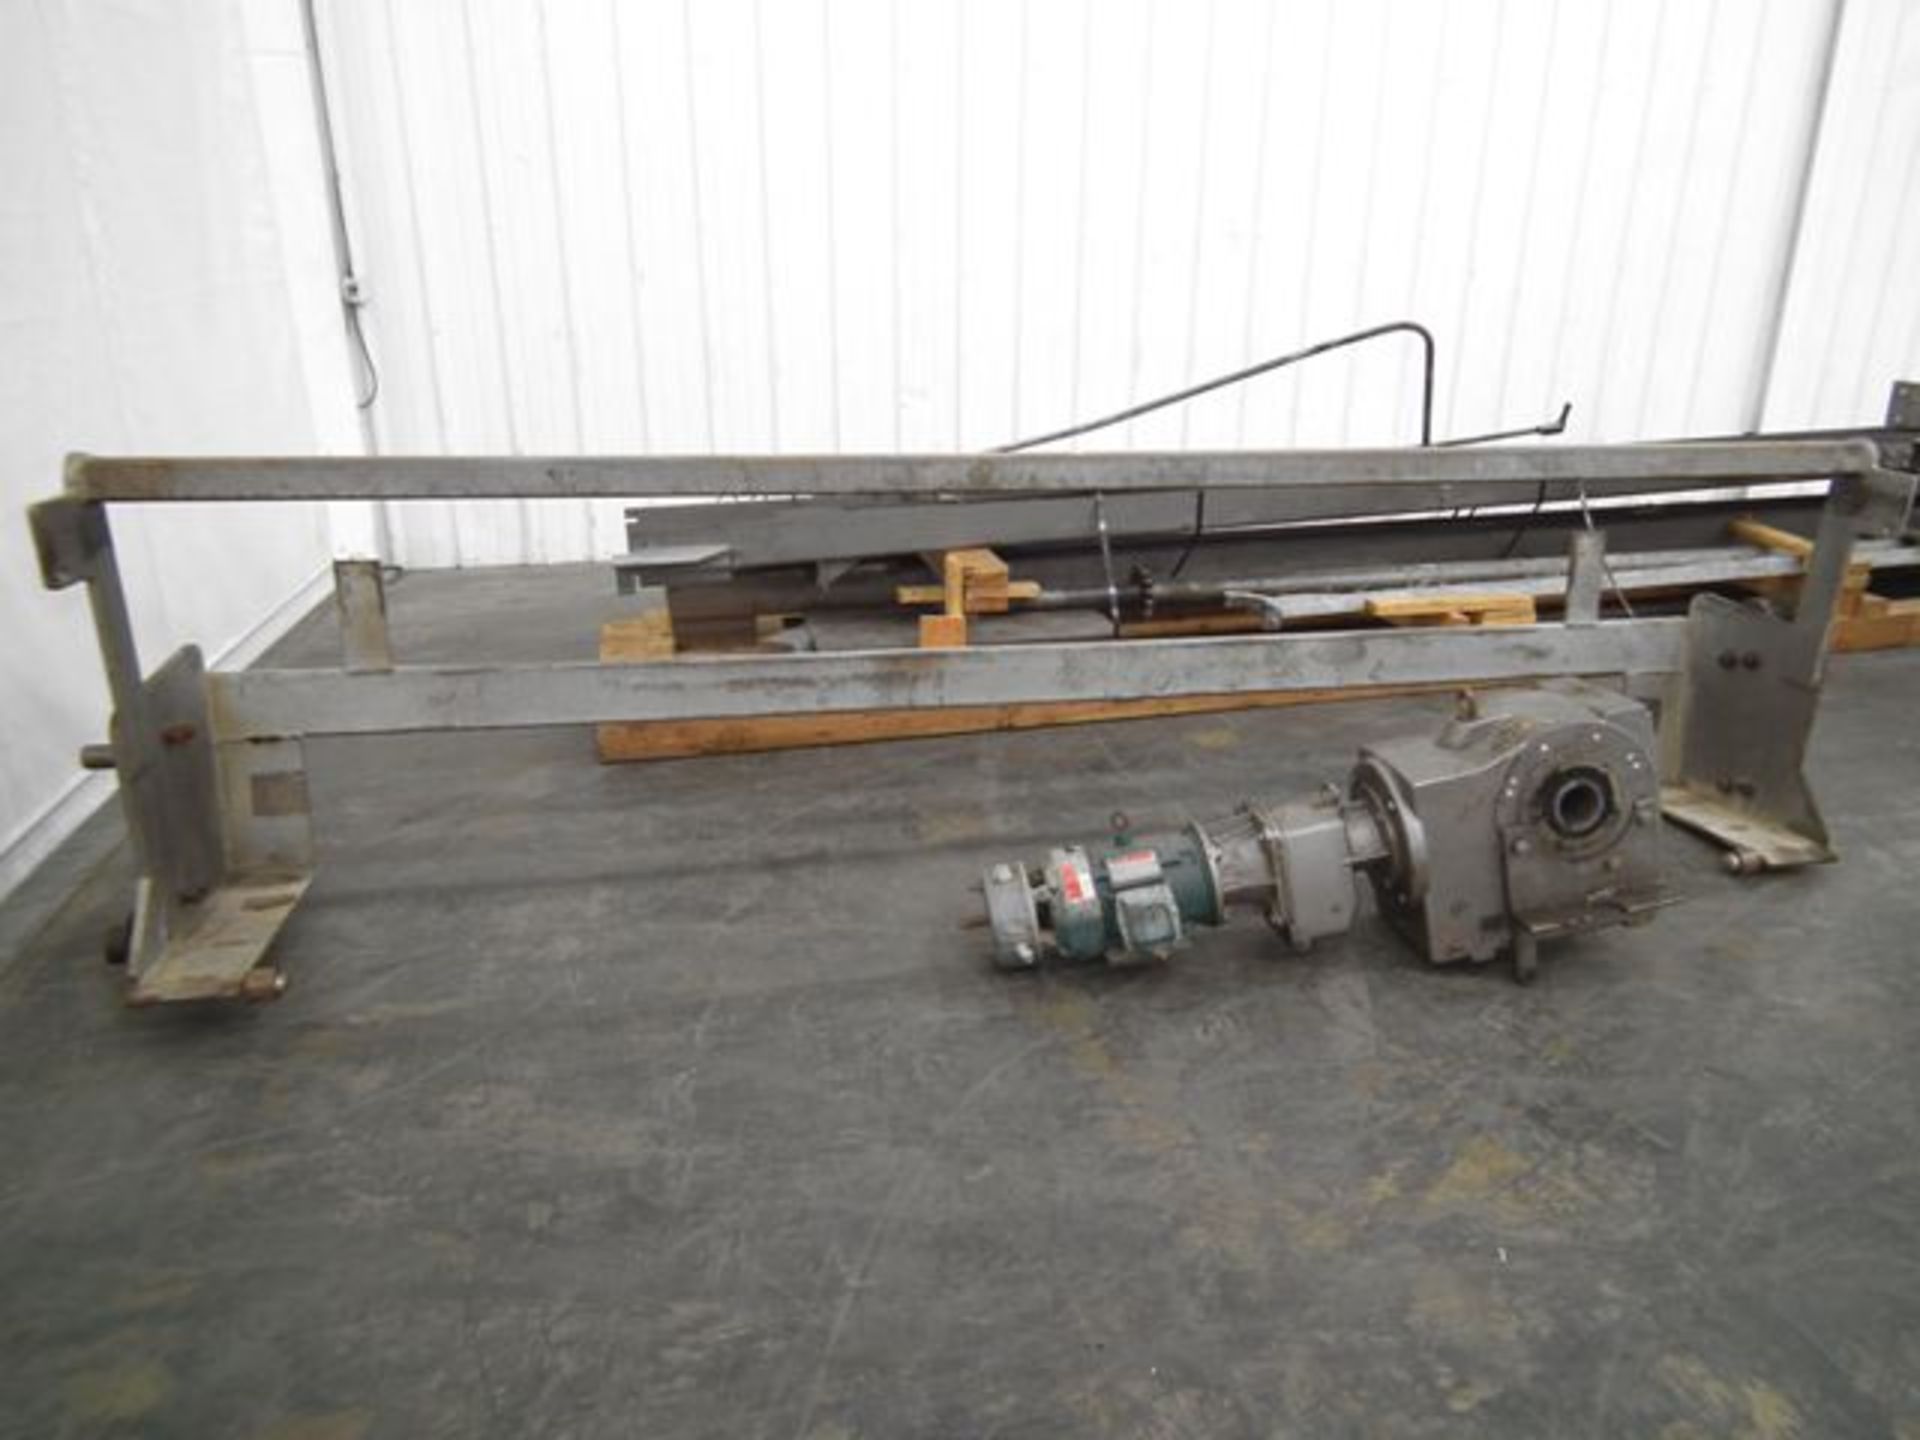 Dough Trough Hoist - RIGGING AND HANDLING FEES: $290 - Image 2 of 4